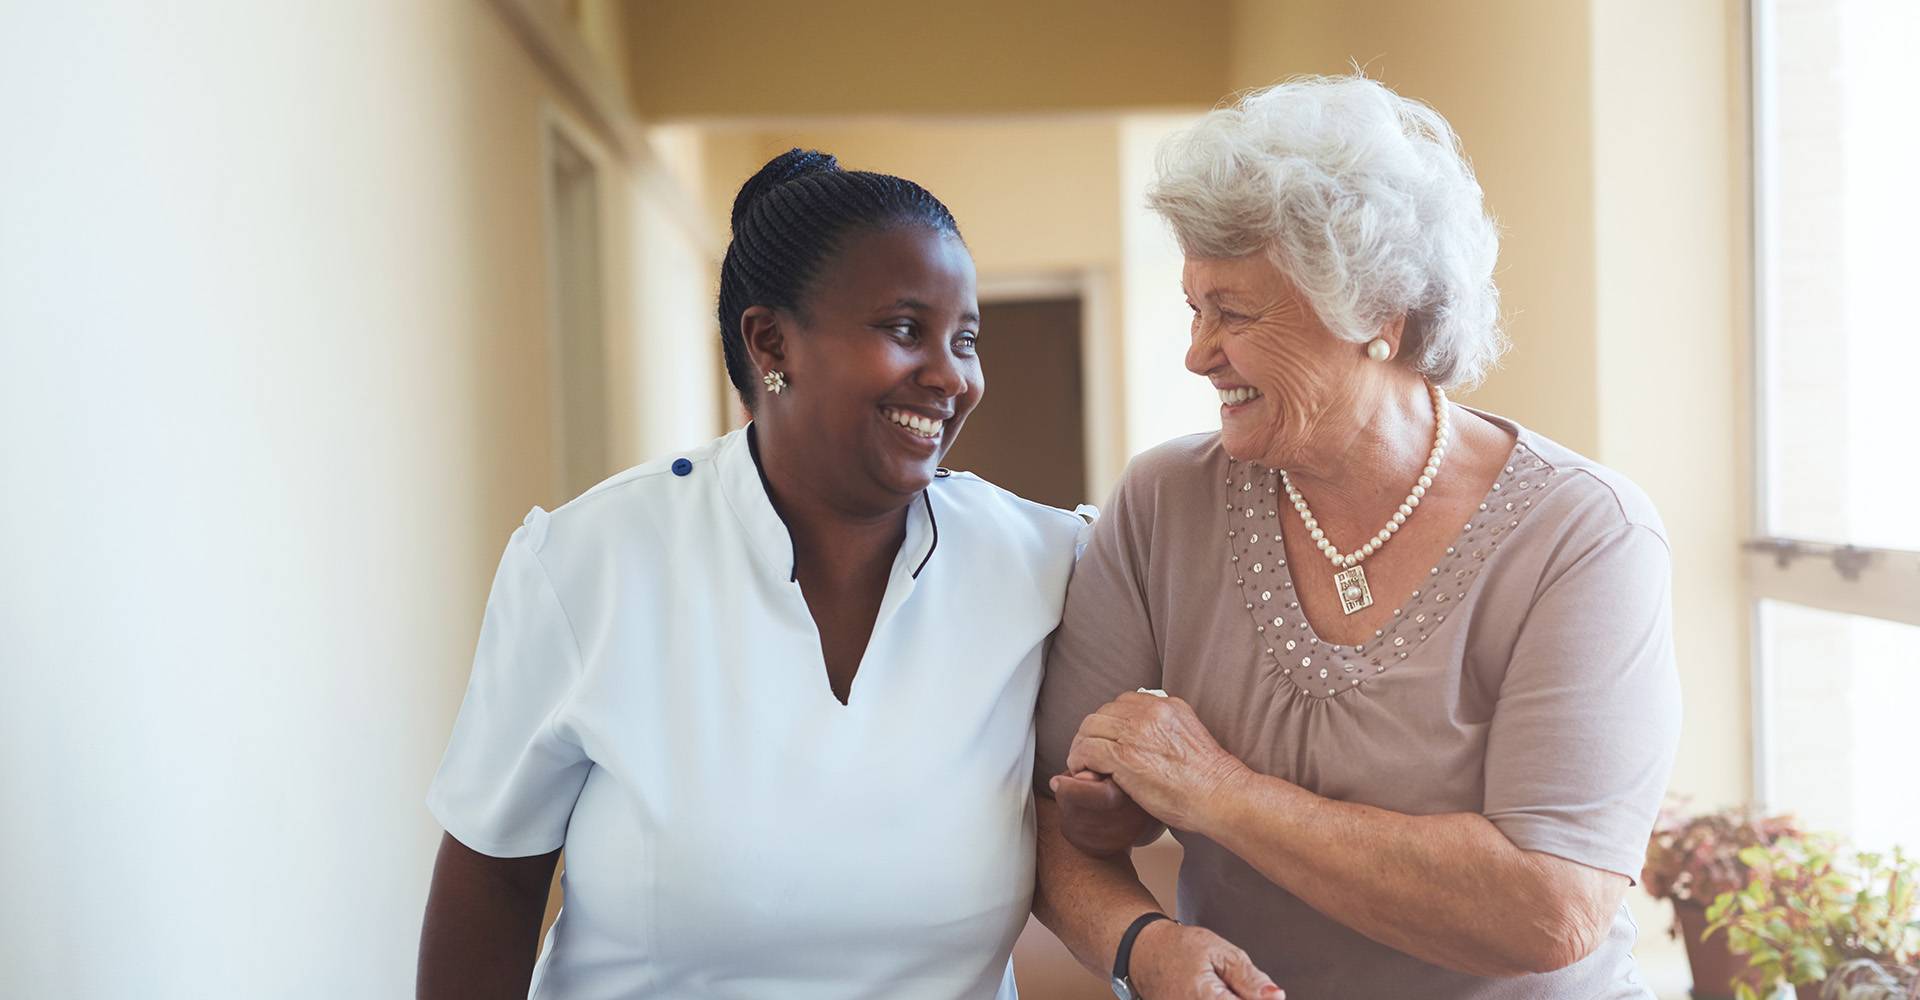 Health-care professional with elderly patient